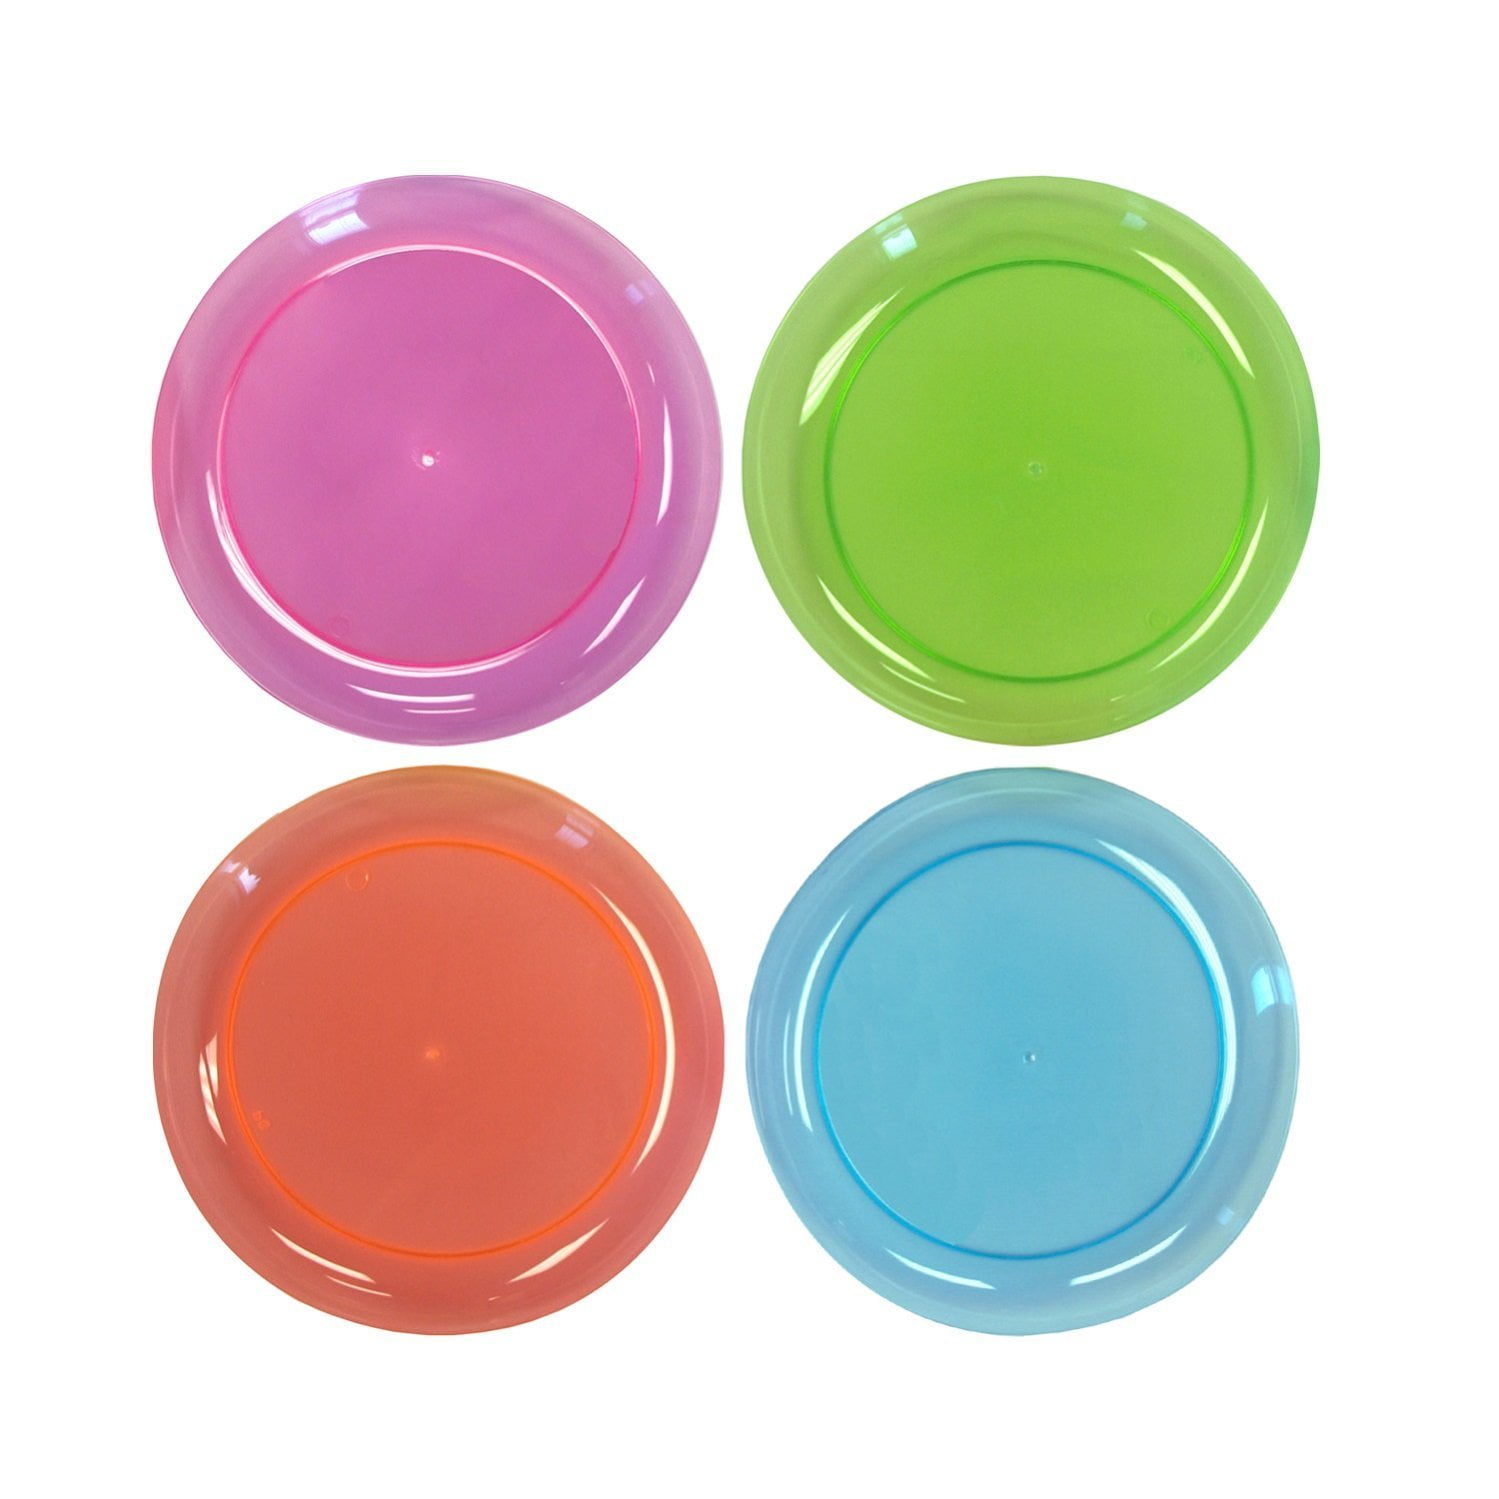 40-Count Assorted Neon EDI Hard Plastic 9-Inch Round Party/Luncheon Plates 